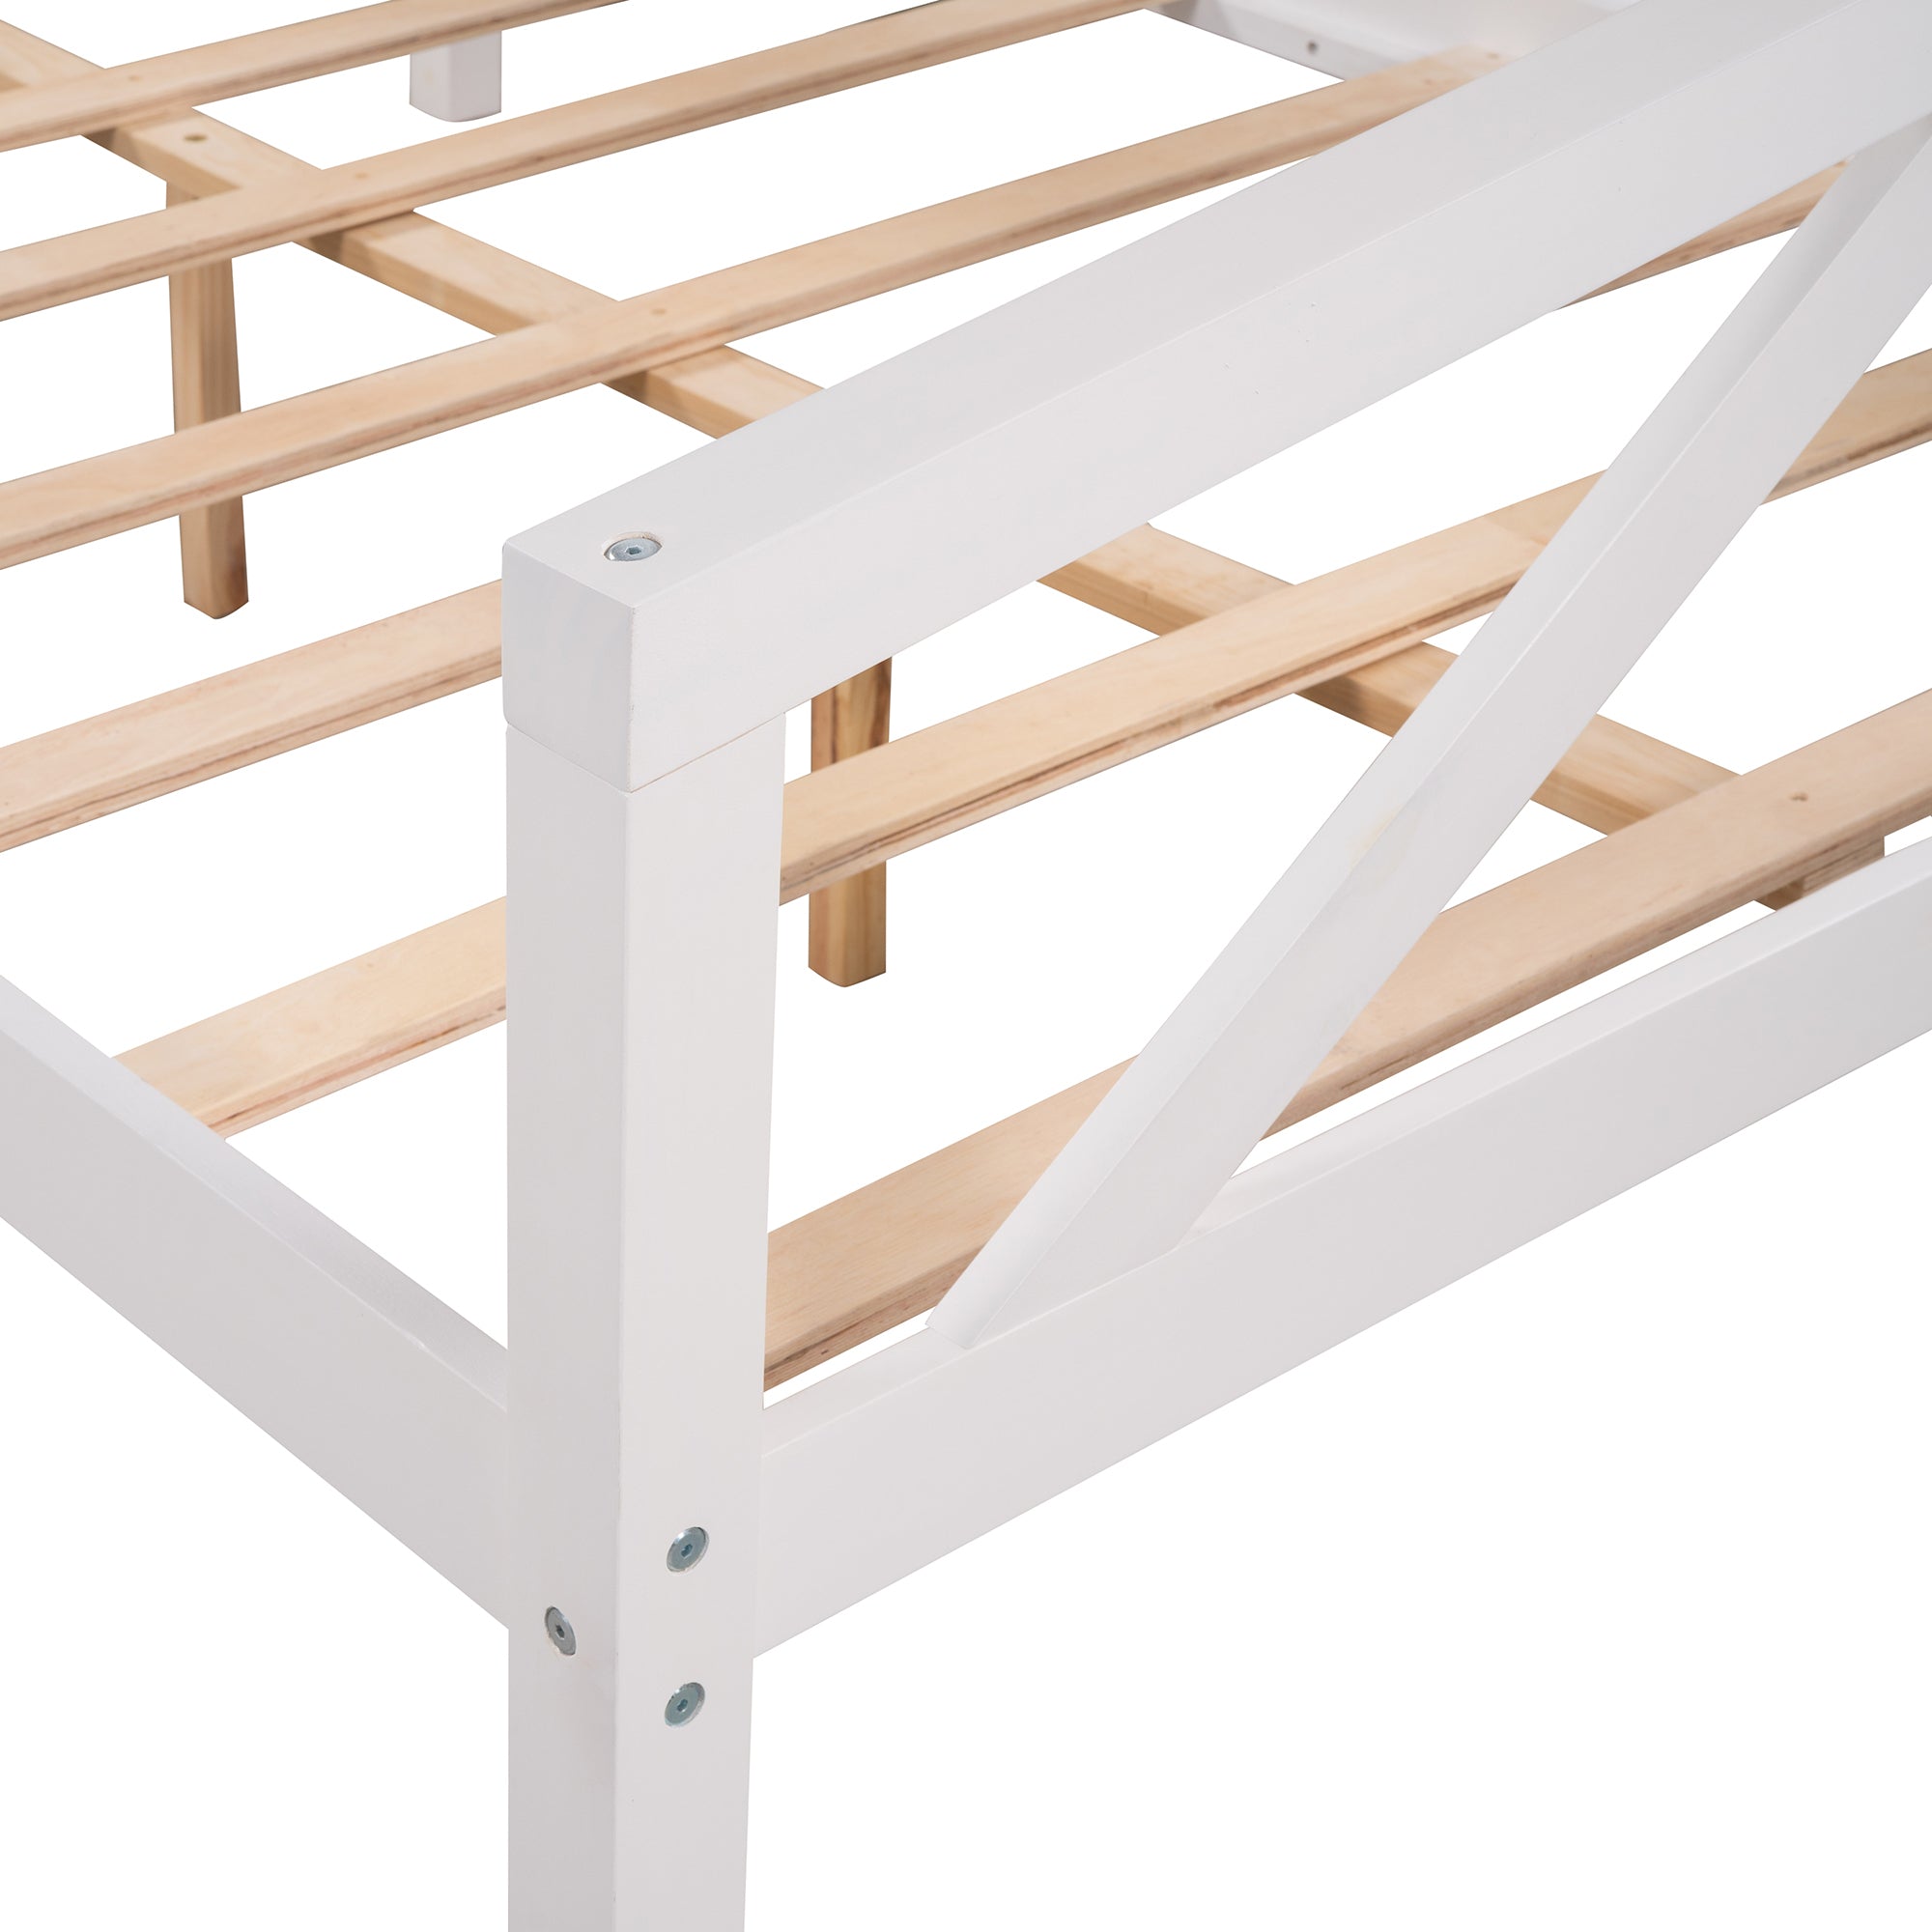 Full size Daybed, Wood Slat Support, White white-solid wood